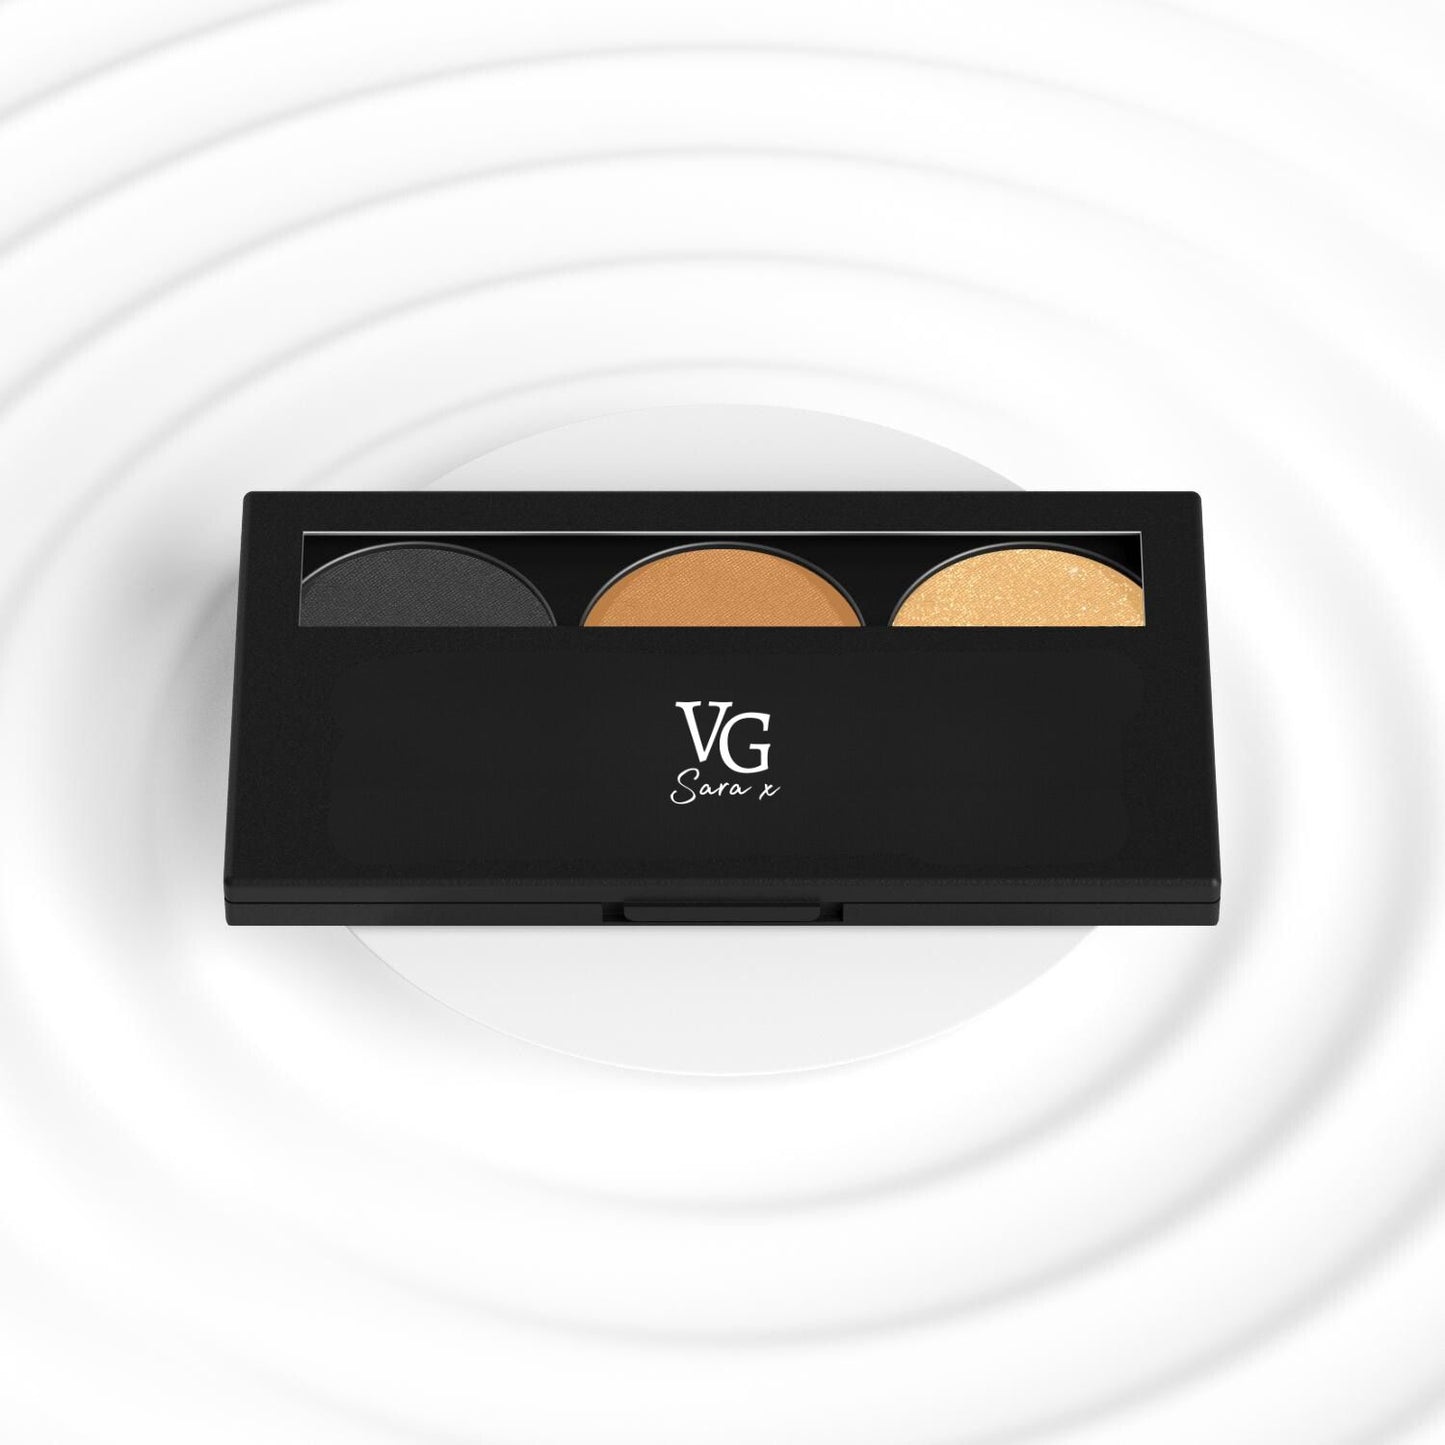 A black eye shadow palette with three colors and a logo